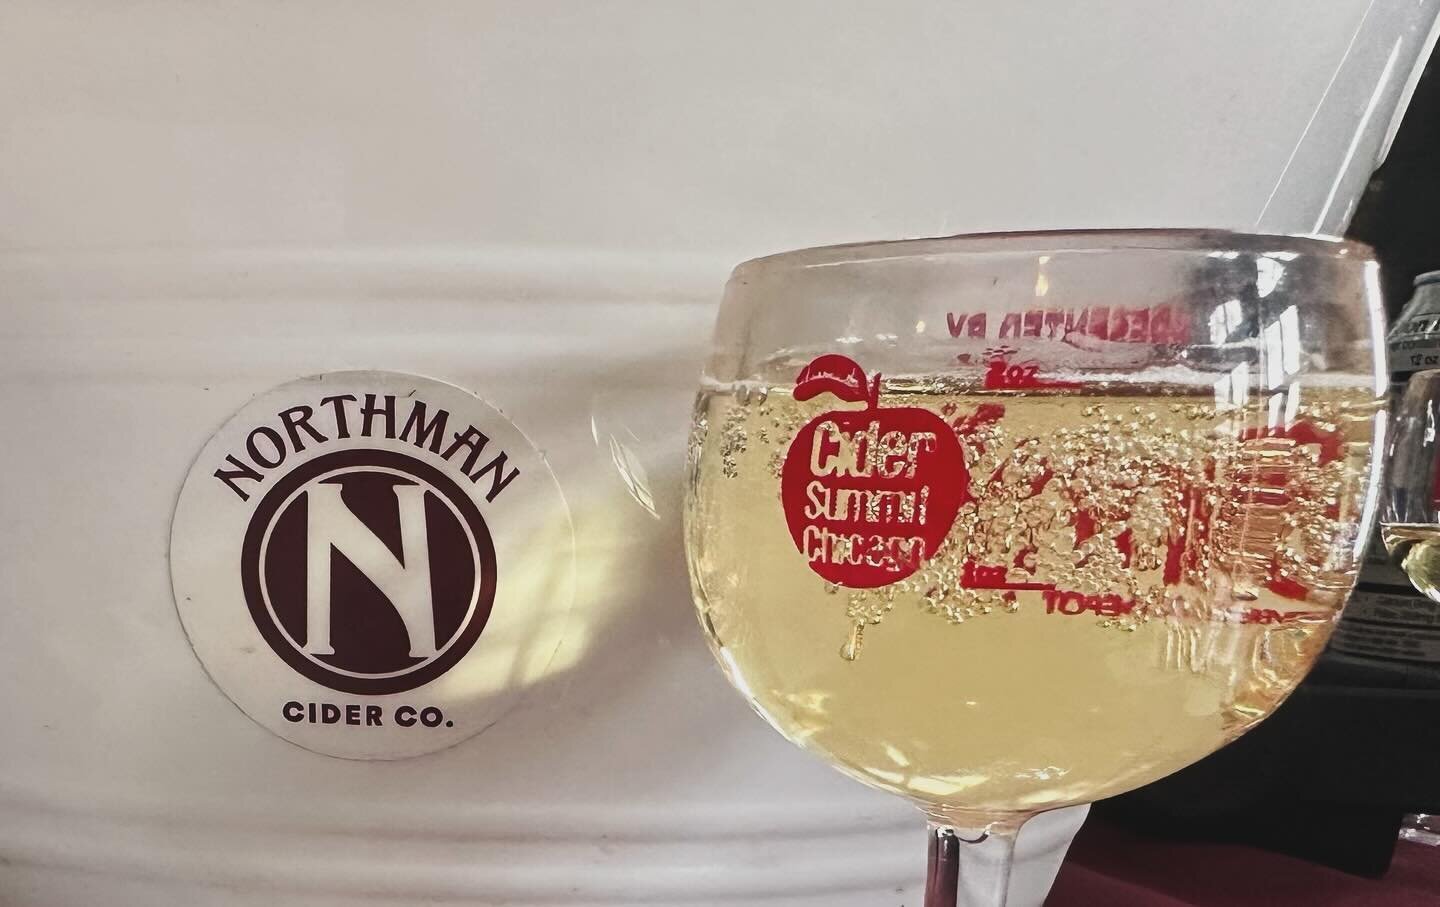 if you haven&rsquo;t tried, The Northman&rsquo;s Hopped cider yet, I implore you to hunt some down&hellip;it is delicious. @chicagocidersummit